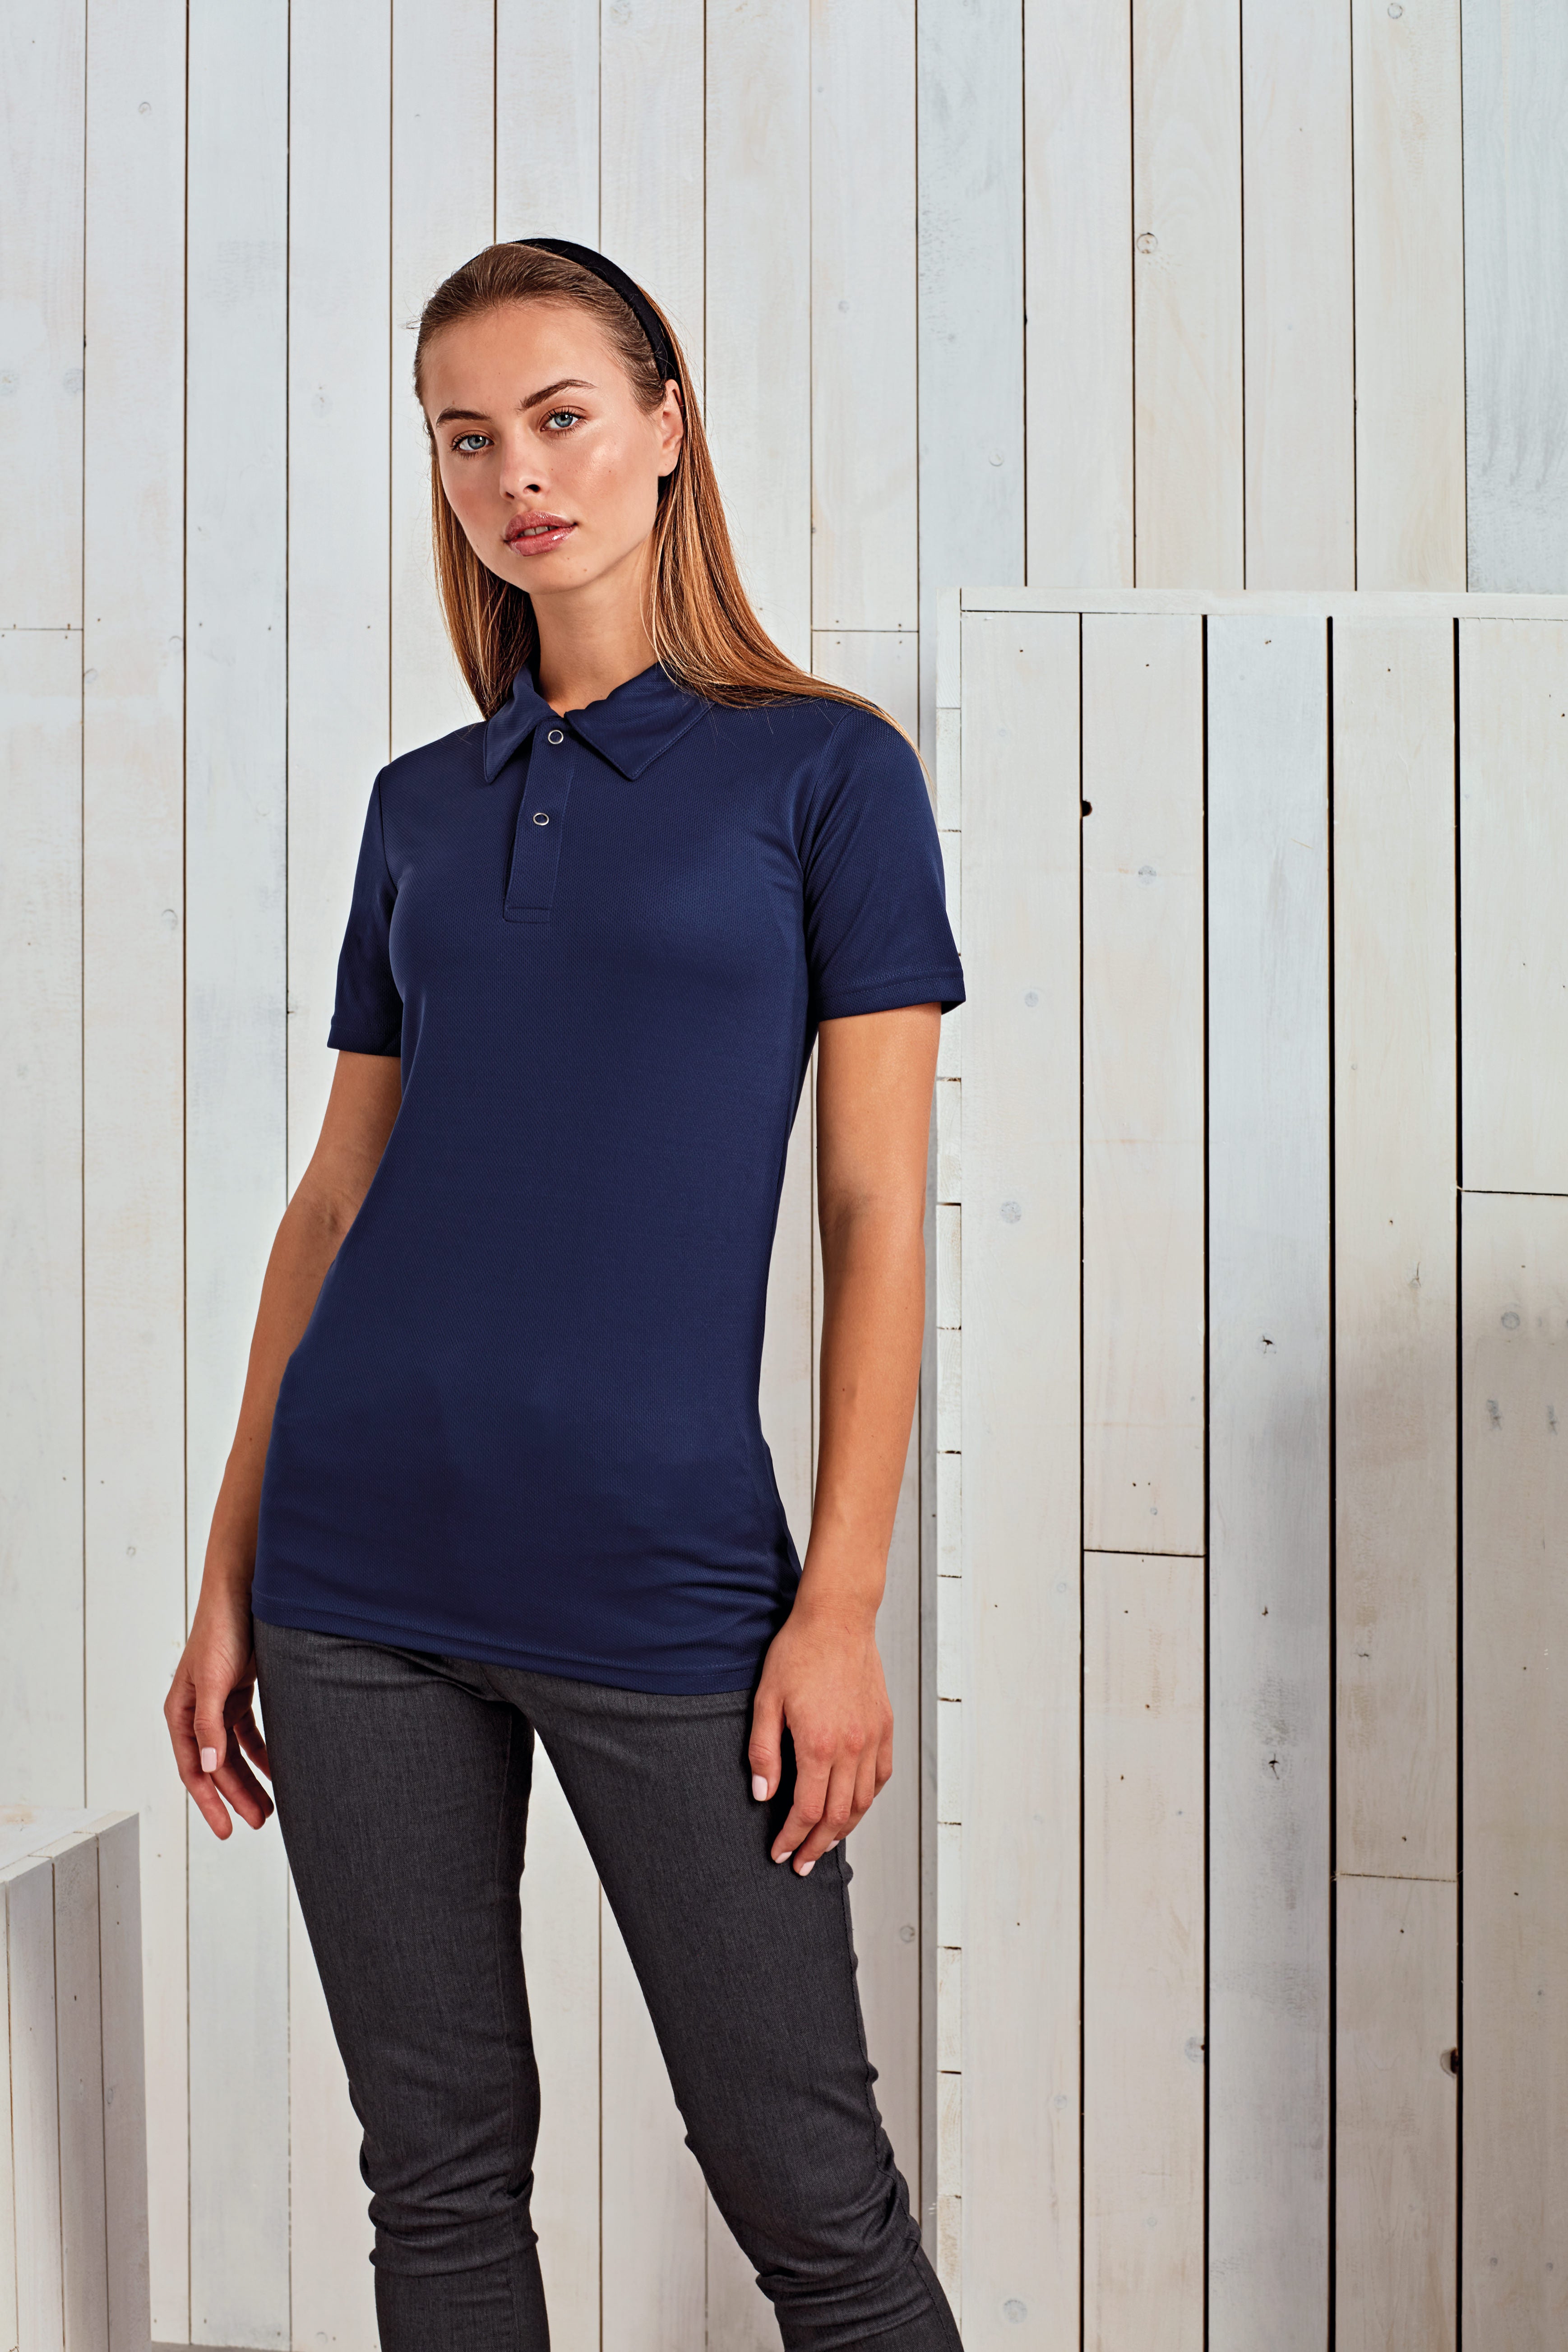 Business Casual Polos for Women - Uniforms